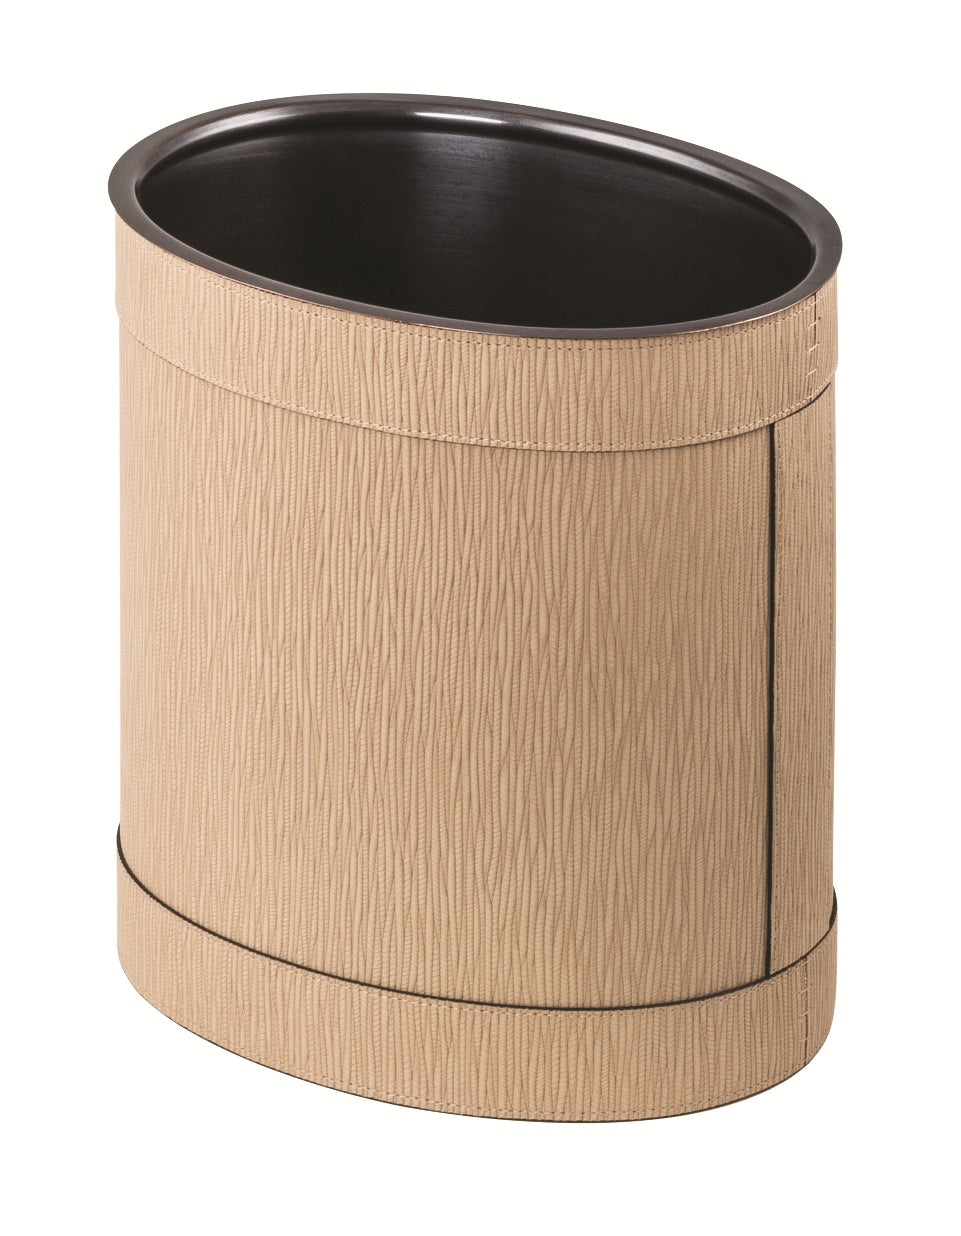 Giobagnara Crosby Oval Wastepaper Bin | All-leather structure with removable inner metal part | Available in three finishes: polished chrome, brushed bronze, brushed brass | Explore Luxury Lifestyle Accessories at 2Jour Concierge, #1 luxury high-end gift & lifestyle shop